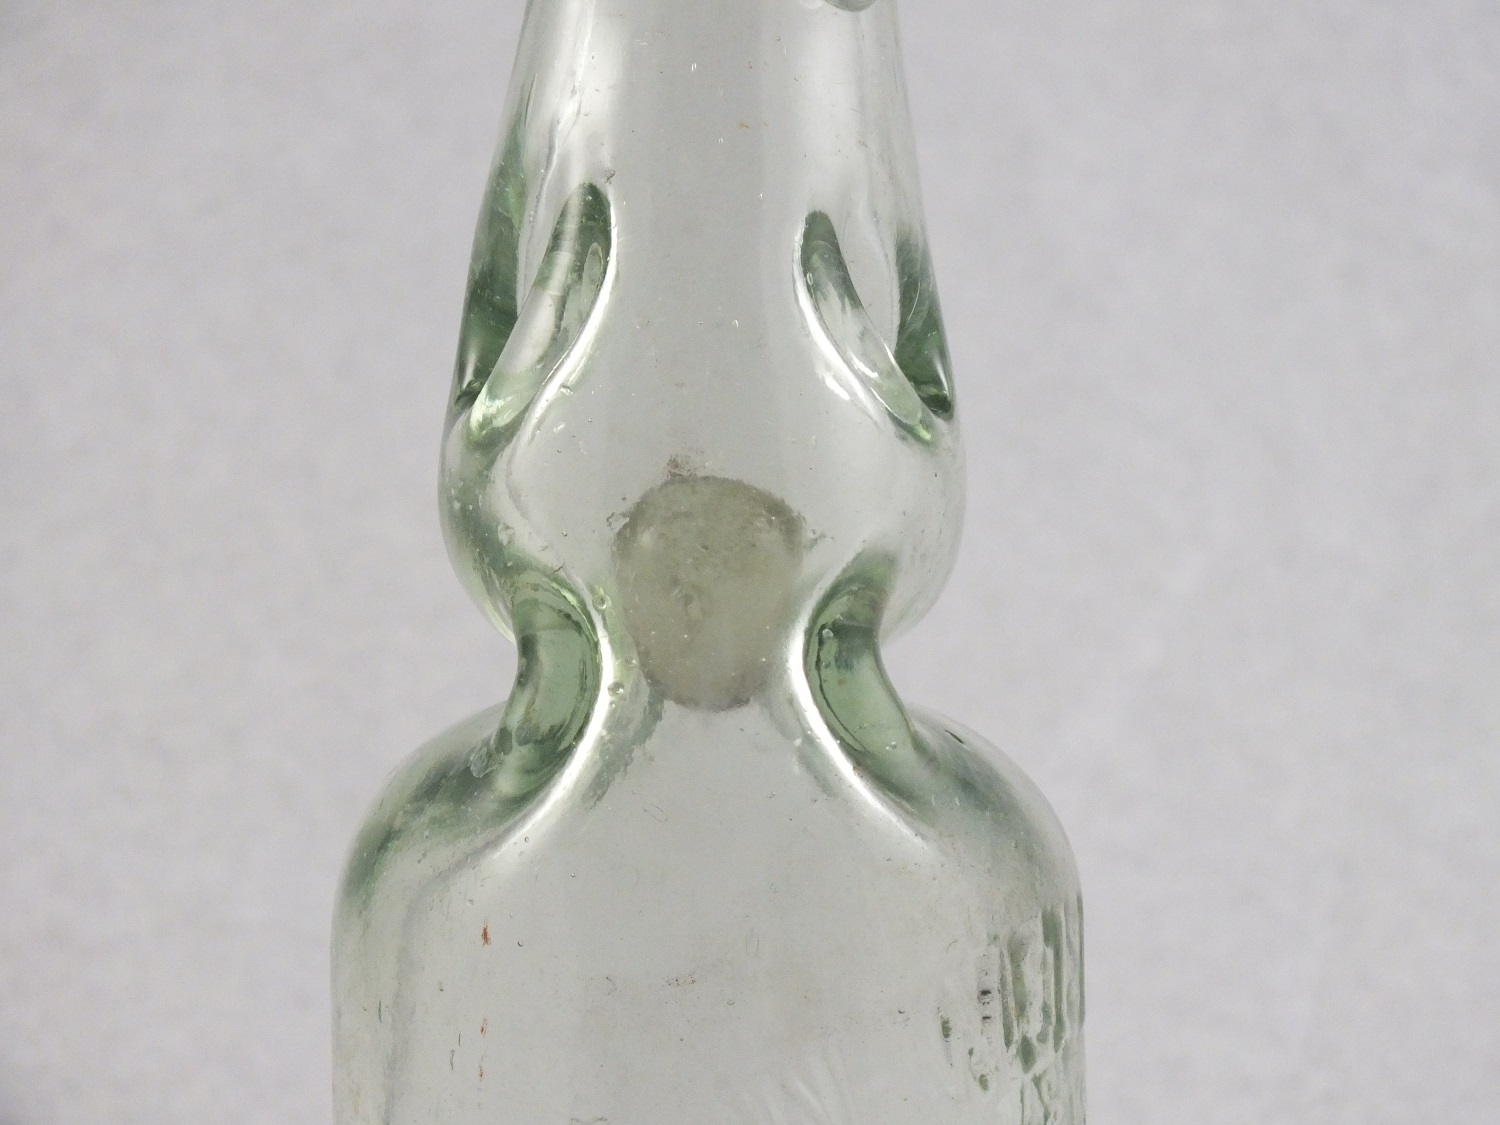 A close-up of a Codd Bottle artifact showing the narrow neck and glass bead inside.